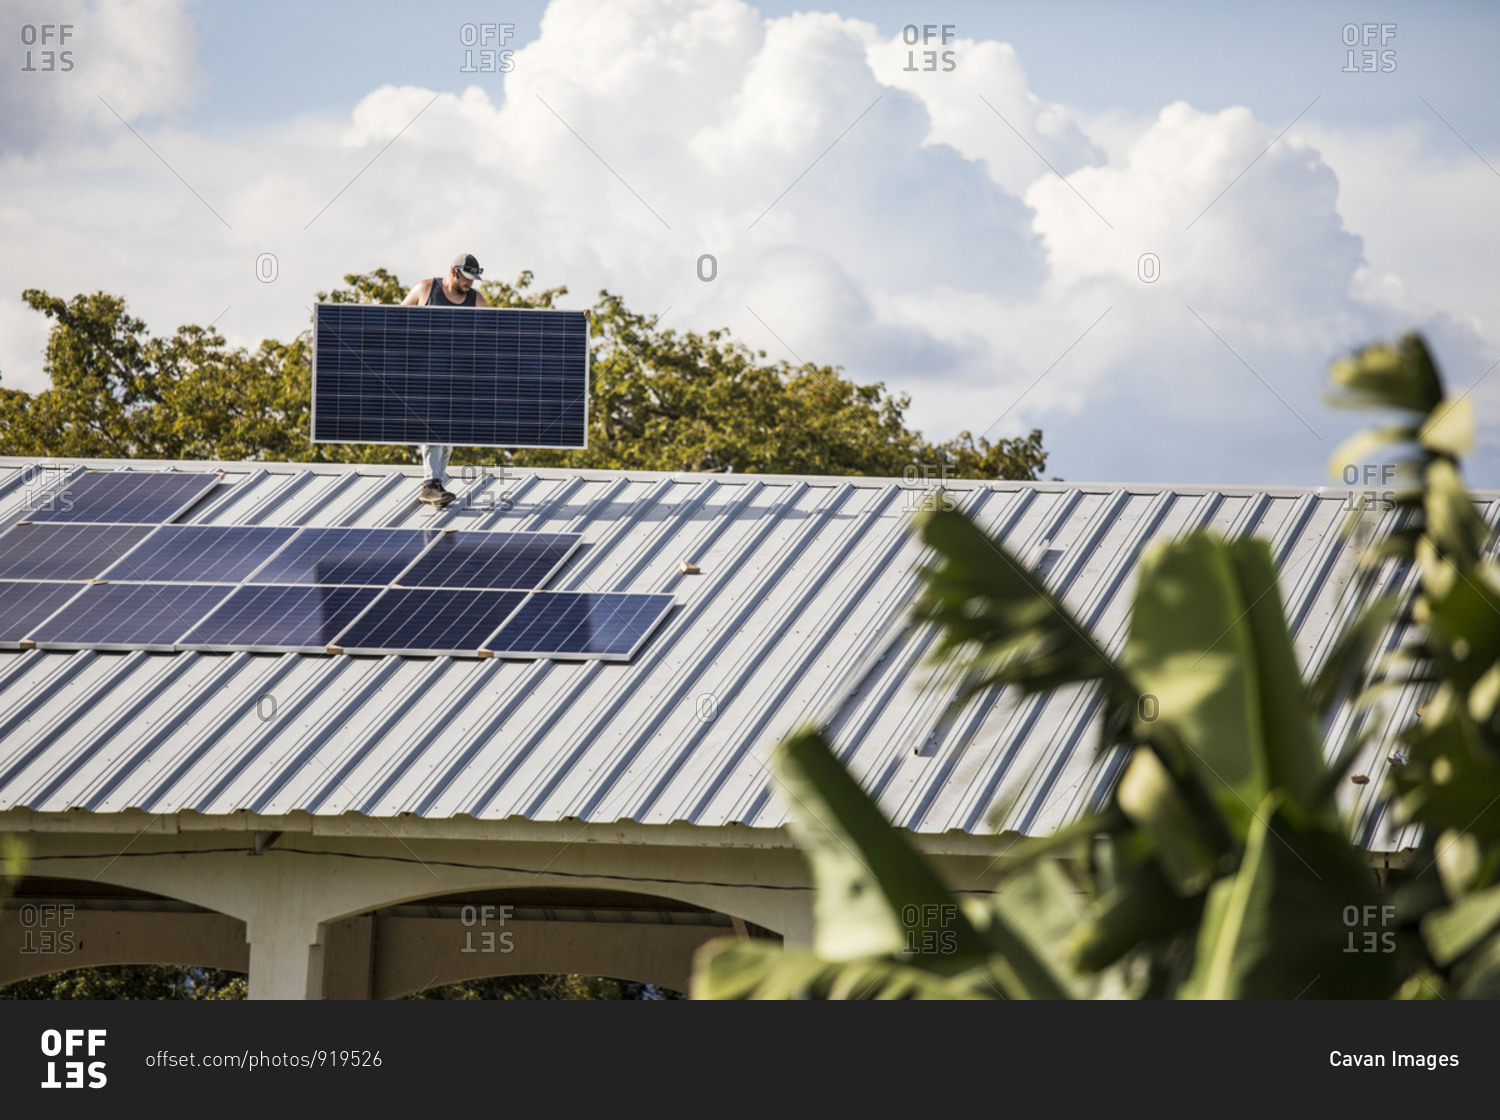 Construction worker carries solar panel on rooftop during install.